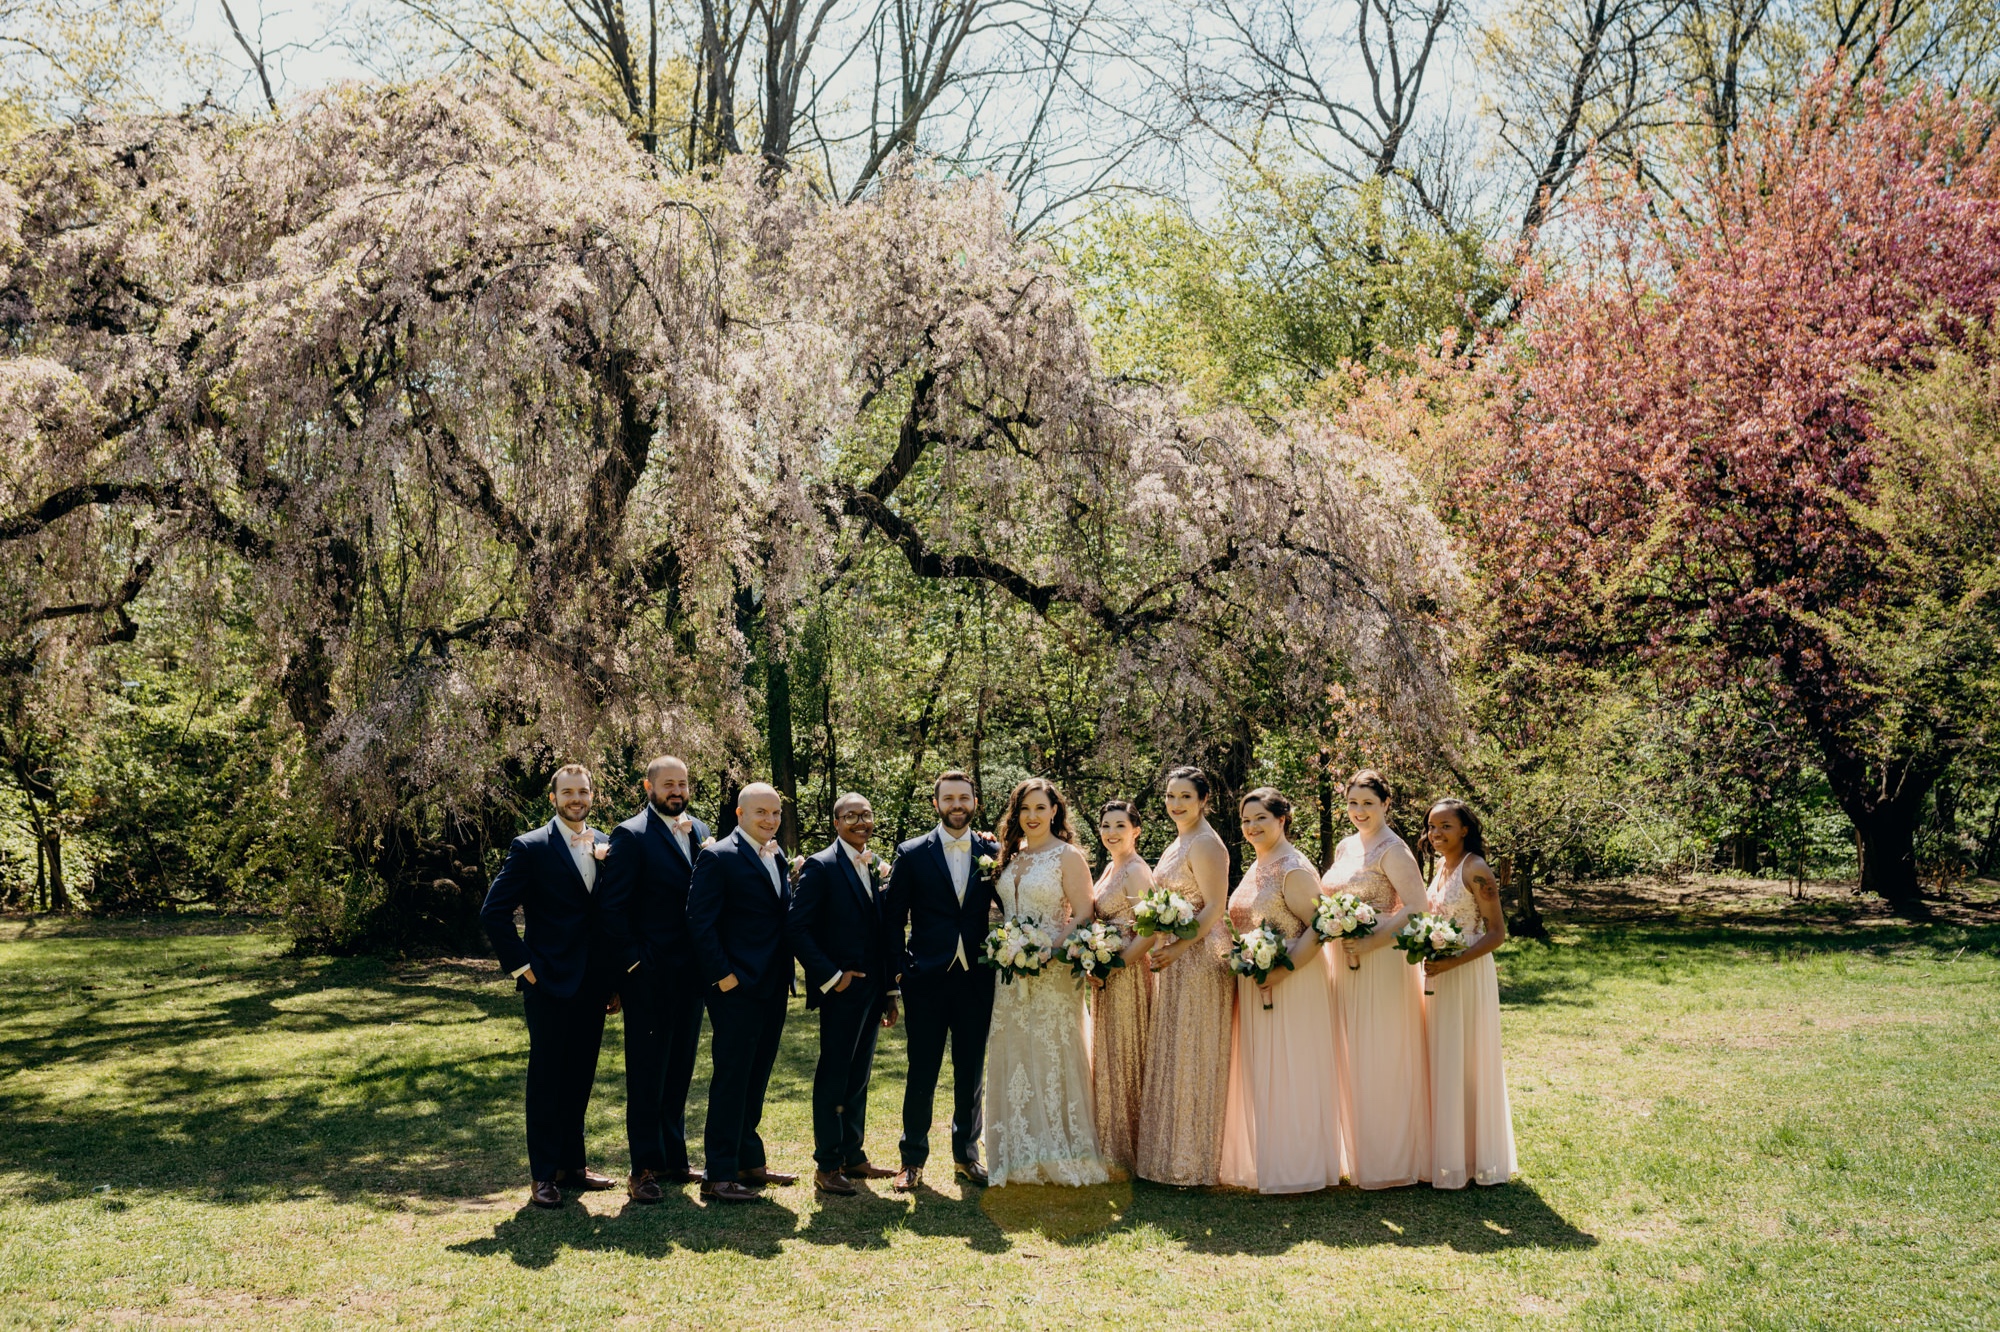 portrait of a bridal party at a park in new jersey during spring